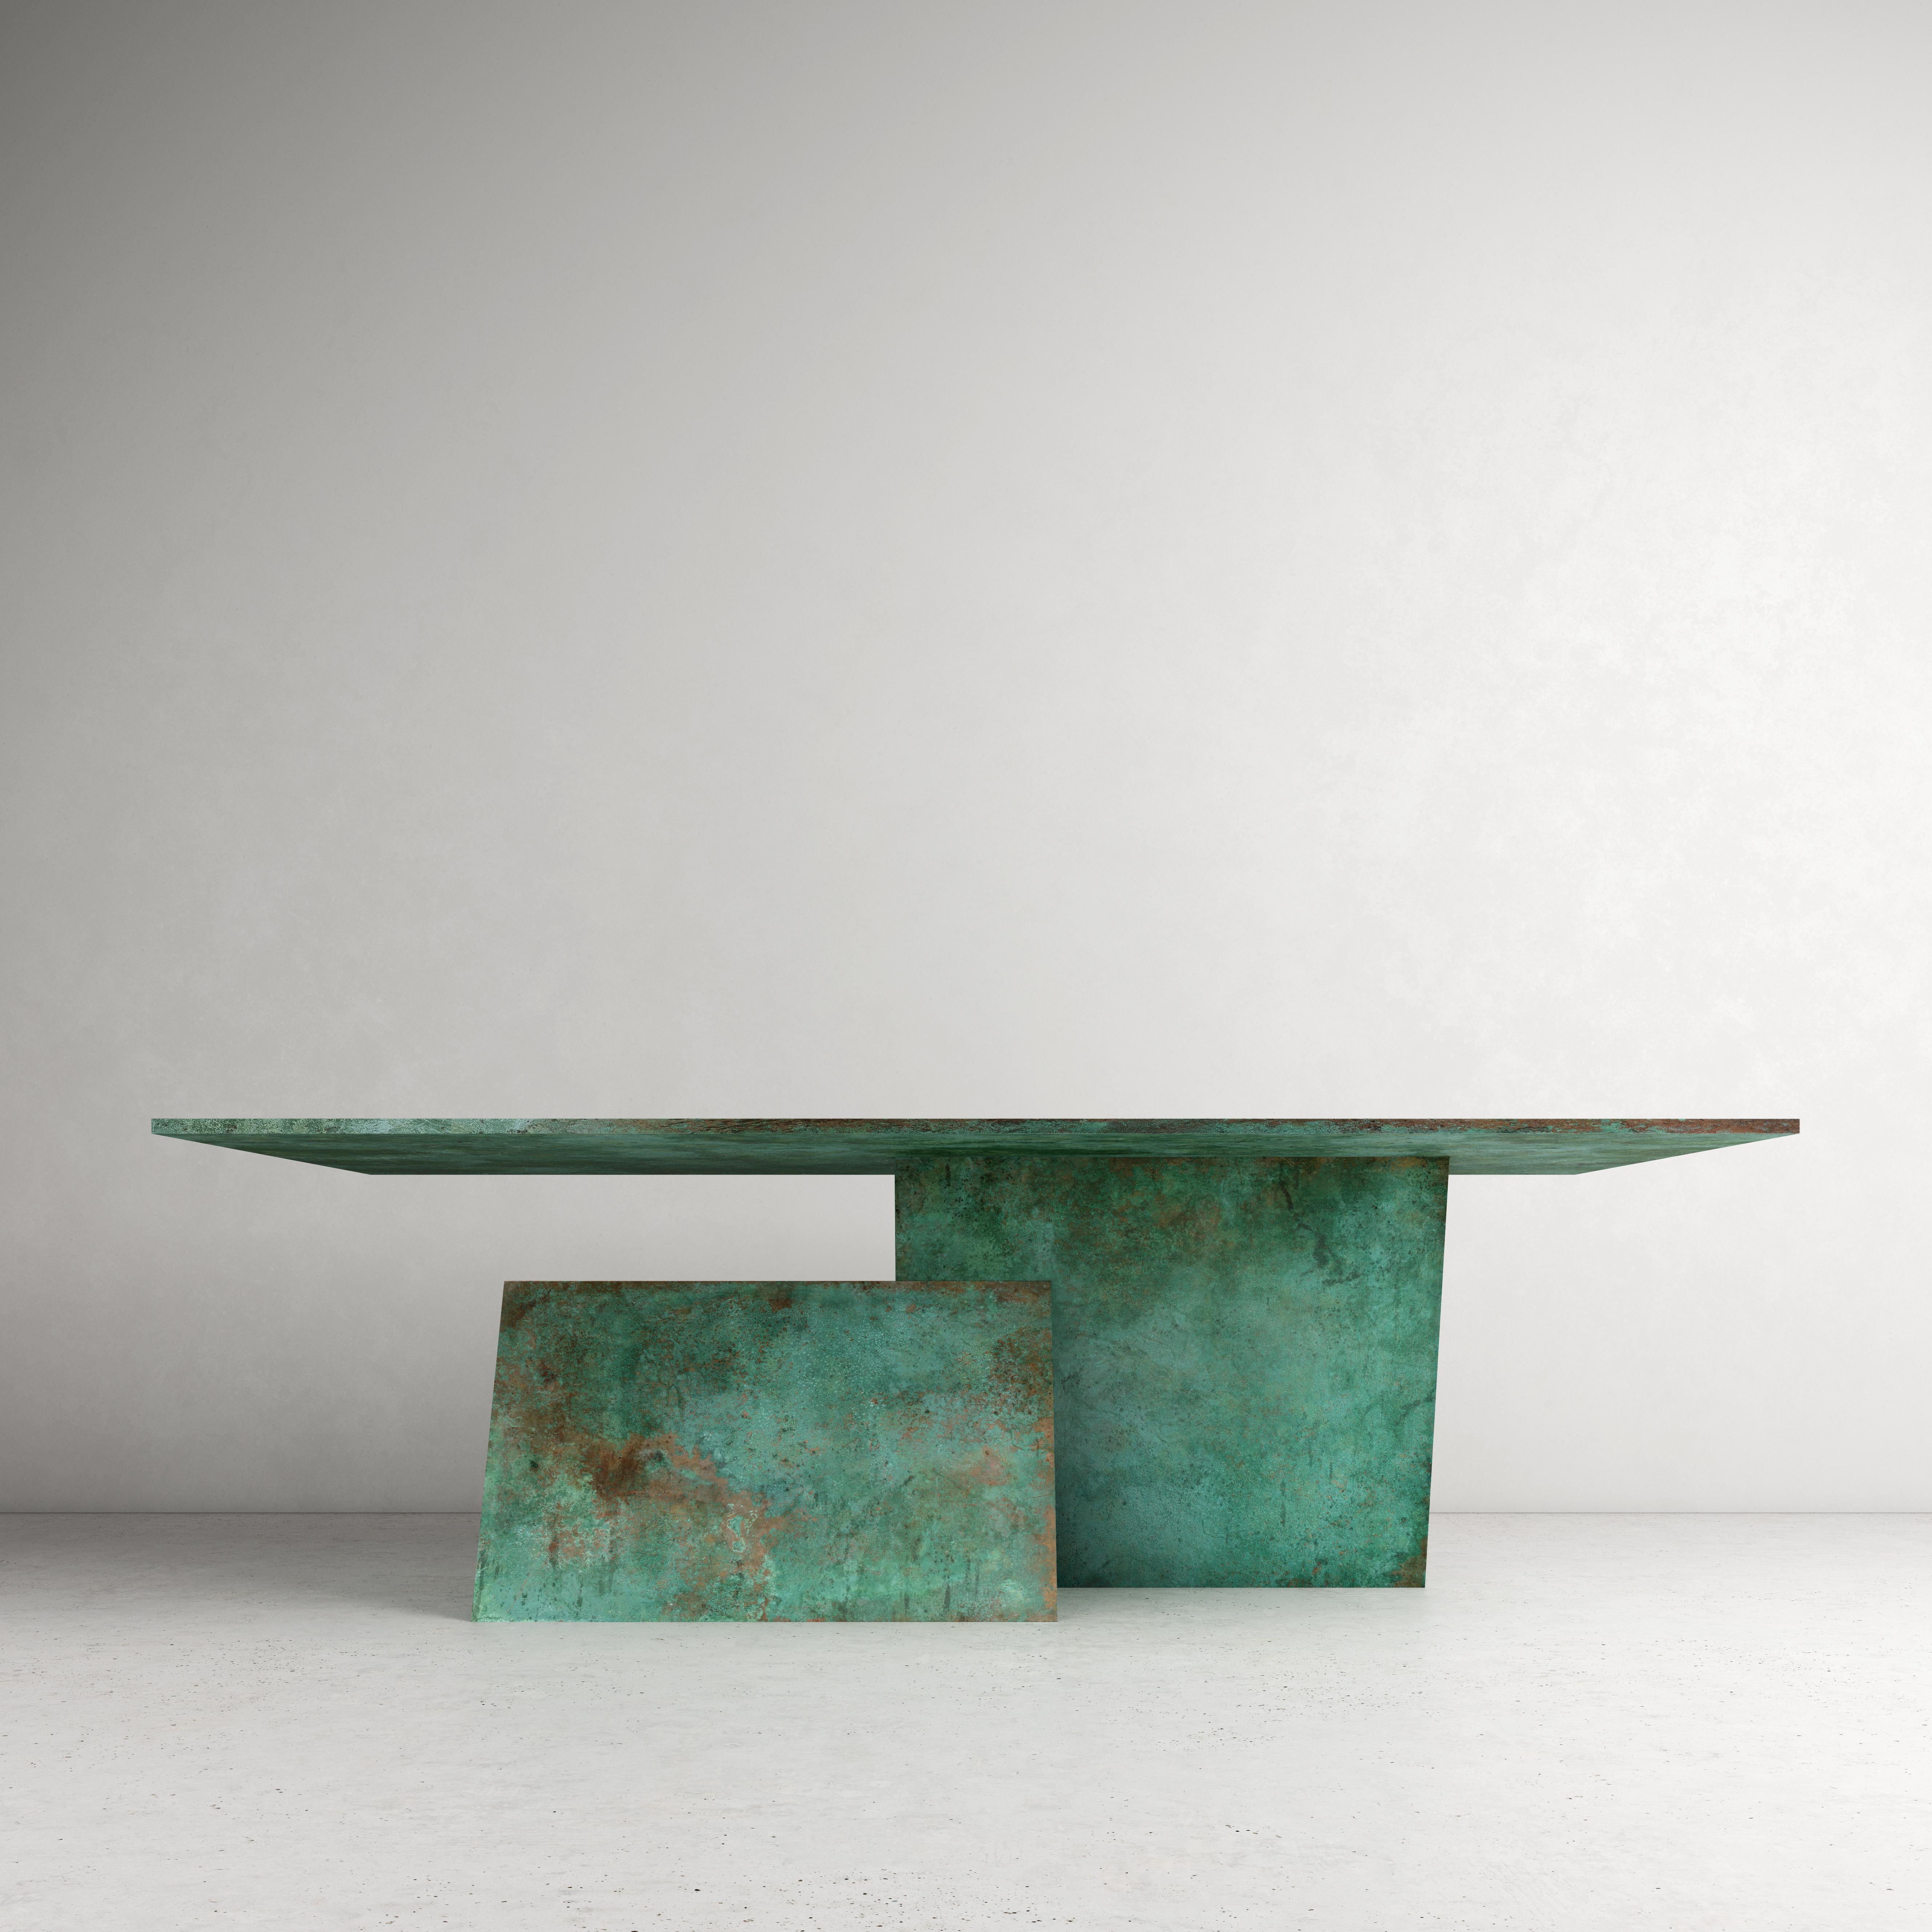 Contemporary table Y by dAM Atelier
Dimensions: L 220 x W 110 x H 73
Materials: Verdigris copper
Also available in stainless steel, please contact us.

dAM atelier is a duo of young Italian architects sharing the passion for design and architecture,